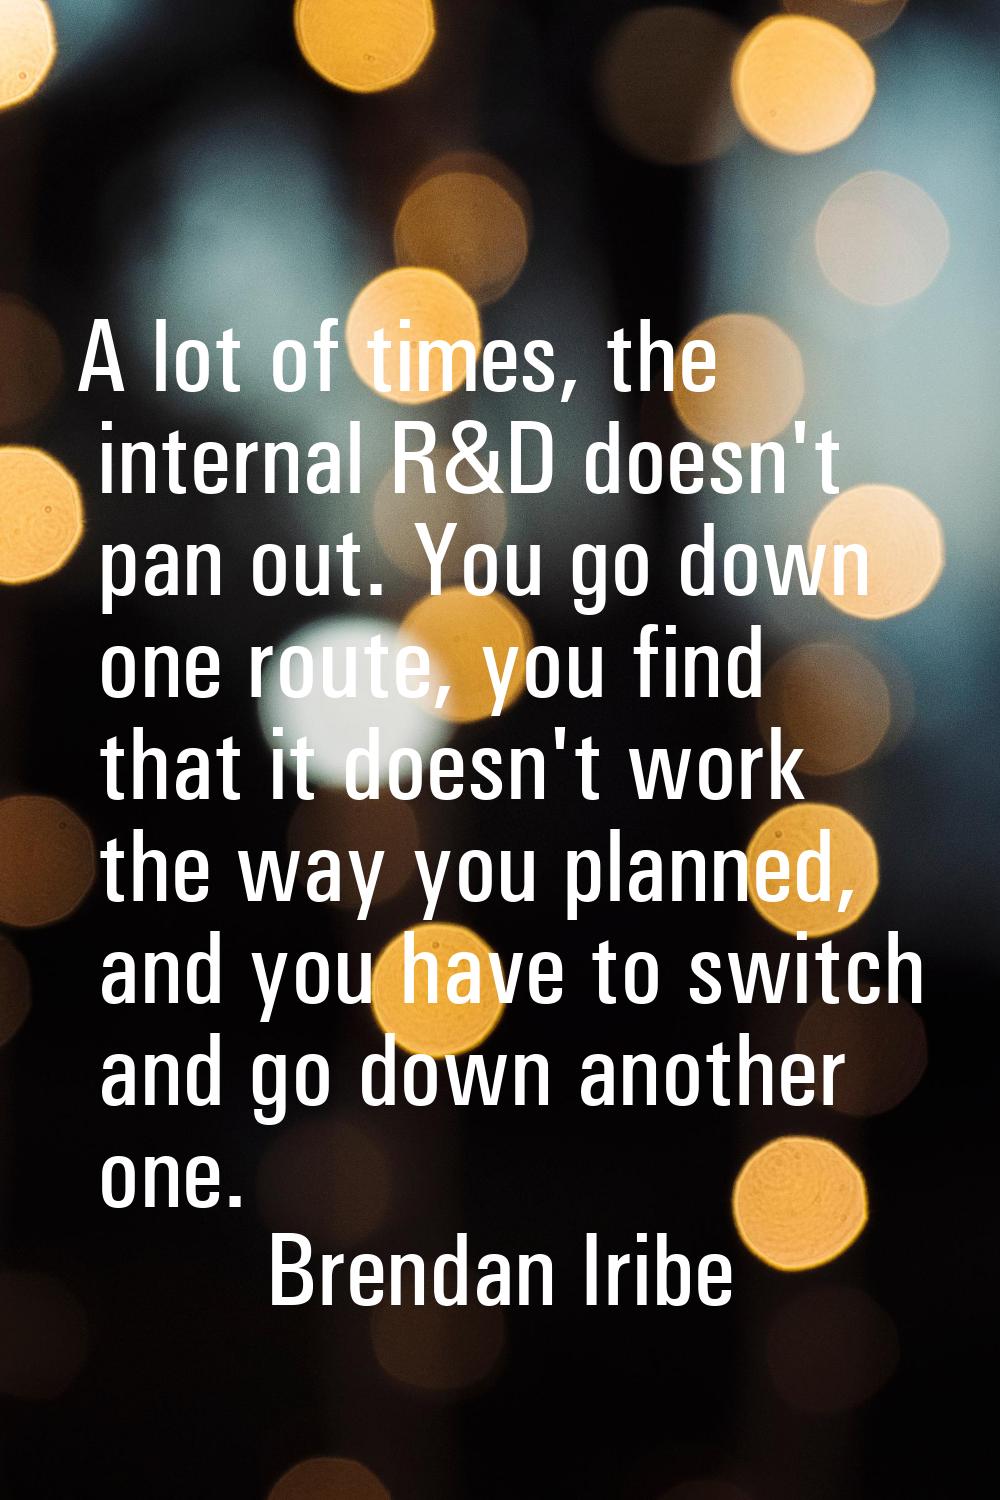 A lot of times, the internal R&D doesn't pan out. You go down one route, you find that it doesn't w